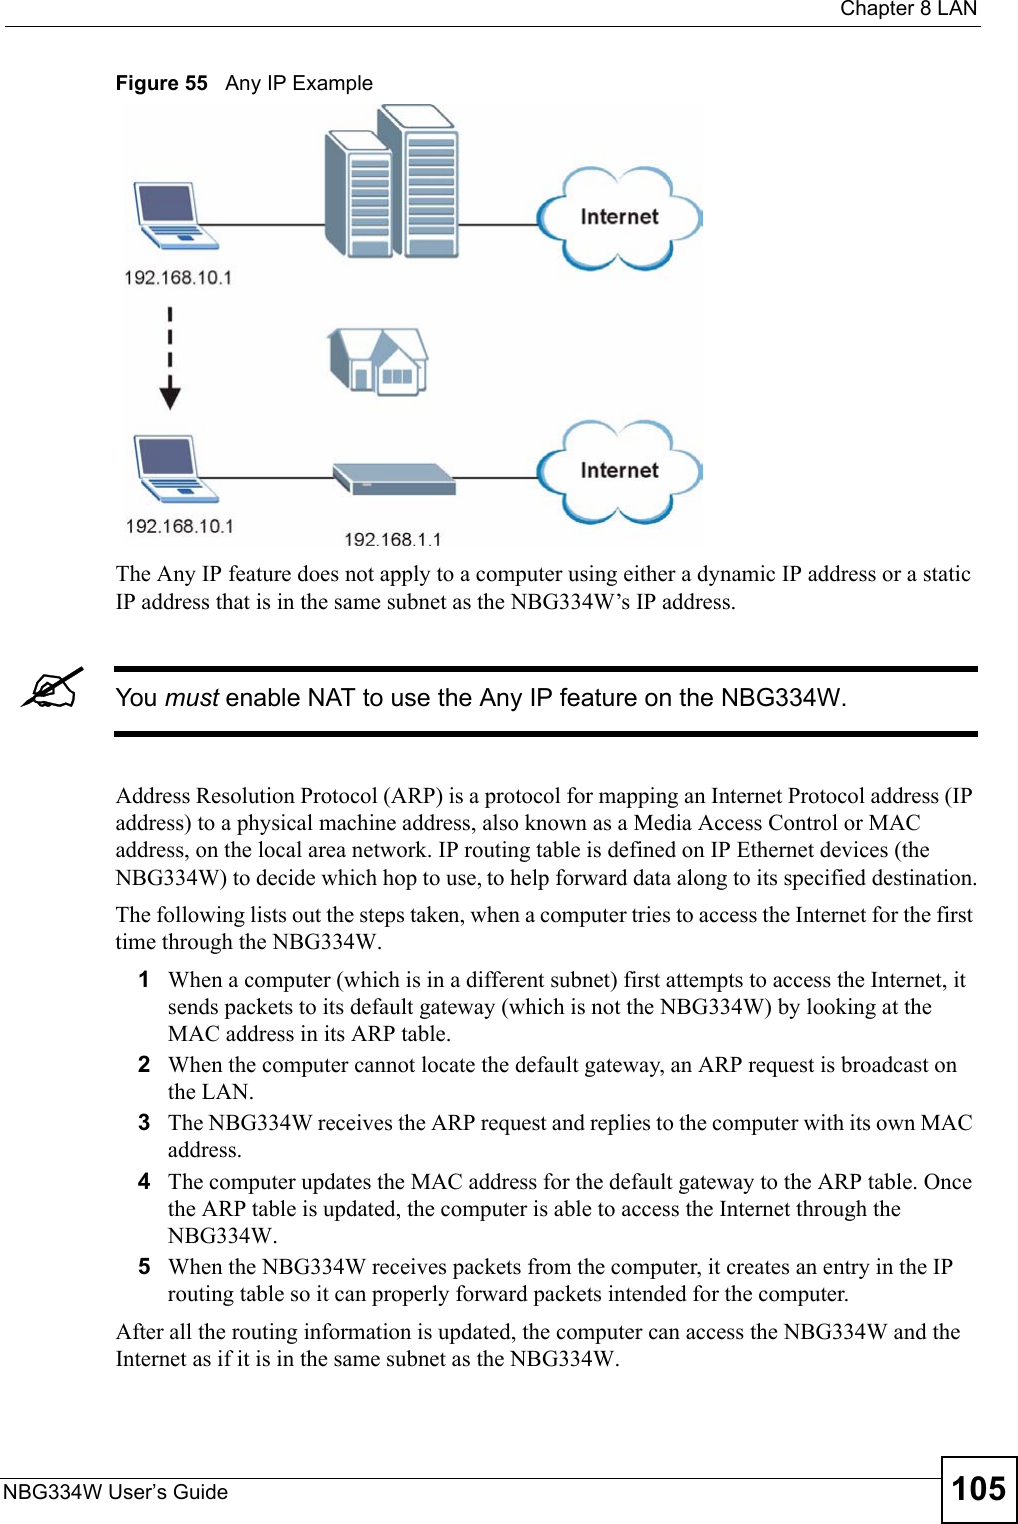  Chapter 8 LANNBG334W User’s Guide 105Figure 55   Any IP ExampleThe Any IP feature does not apply to a computer using either a dynamic IP address or a static IP address that is in the same subnet as the NBG334W’s IP address.&quot;You must enable NAT to use the Any IP feature on the NBG334W. Address Resolution Protocol (ARP) is a protocol for mapping an Internet Protocol address (IP address) to a physical machine address, also known as a Media Access Control or MAC address, on the local area network. IP routing table is defined on IP Ethernet devices (the NBG334W) to decide which hop to use, to help forward data along to its specified destination.The following lists out the steps taken, when a computer tries to access the Internet for the first time through the NBG334W.1When a computer (which is in a different subnet) first attempts to access the Internet, it sends packets to its default gateway (which is not the NBG334W) by looking at the MAC address in its ARP table. 2When the computer cannot locate the default gateway, an ARP request is broadcast on the LAN. 3The NBG334W receives the ARP request and replies to the computer with its own MAC address. 4The computer updates the MAC address for the default gateway to the ARP table. Once the ARP table is updated, the computer is able to access the Internet through the NBG334W. 5When the NBG334W receives packets from the computer, it creates an entry in the IP routing table so it can properly forward packets intended for the computer. After all the routing information is updated, the computer can access the NBG334W and the Internet as if it is in the same subnet as the NBG334W. 